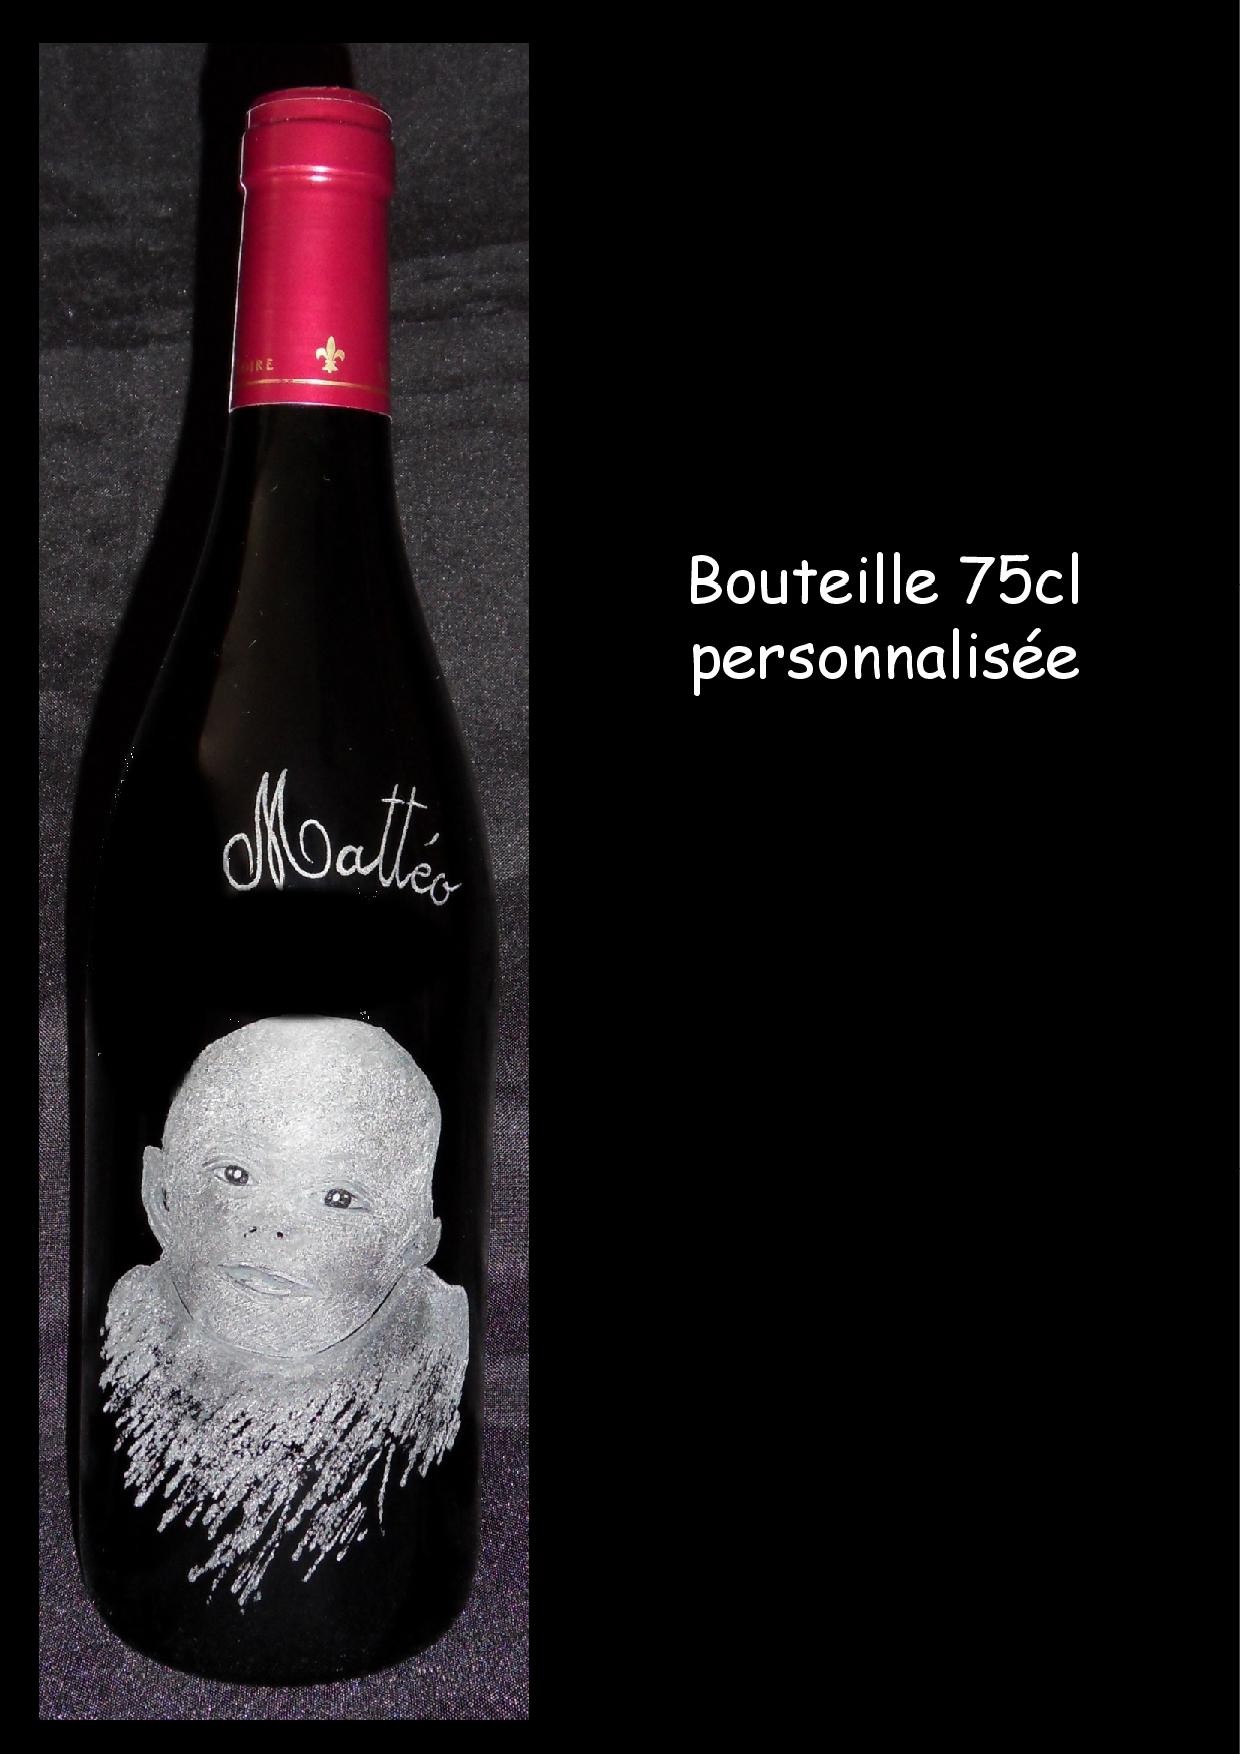 Bouteille 75cl personnalisee matteo